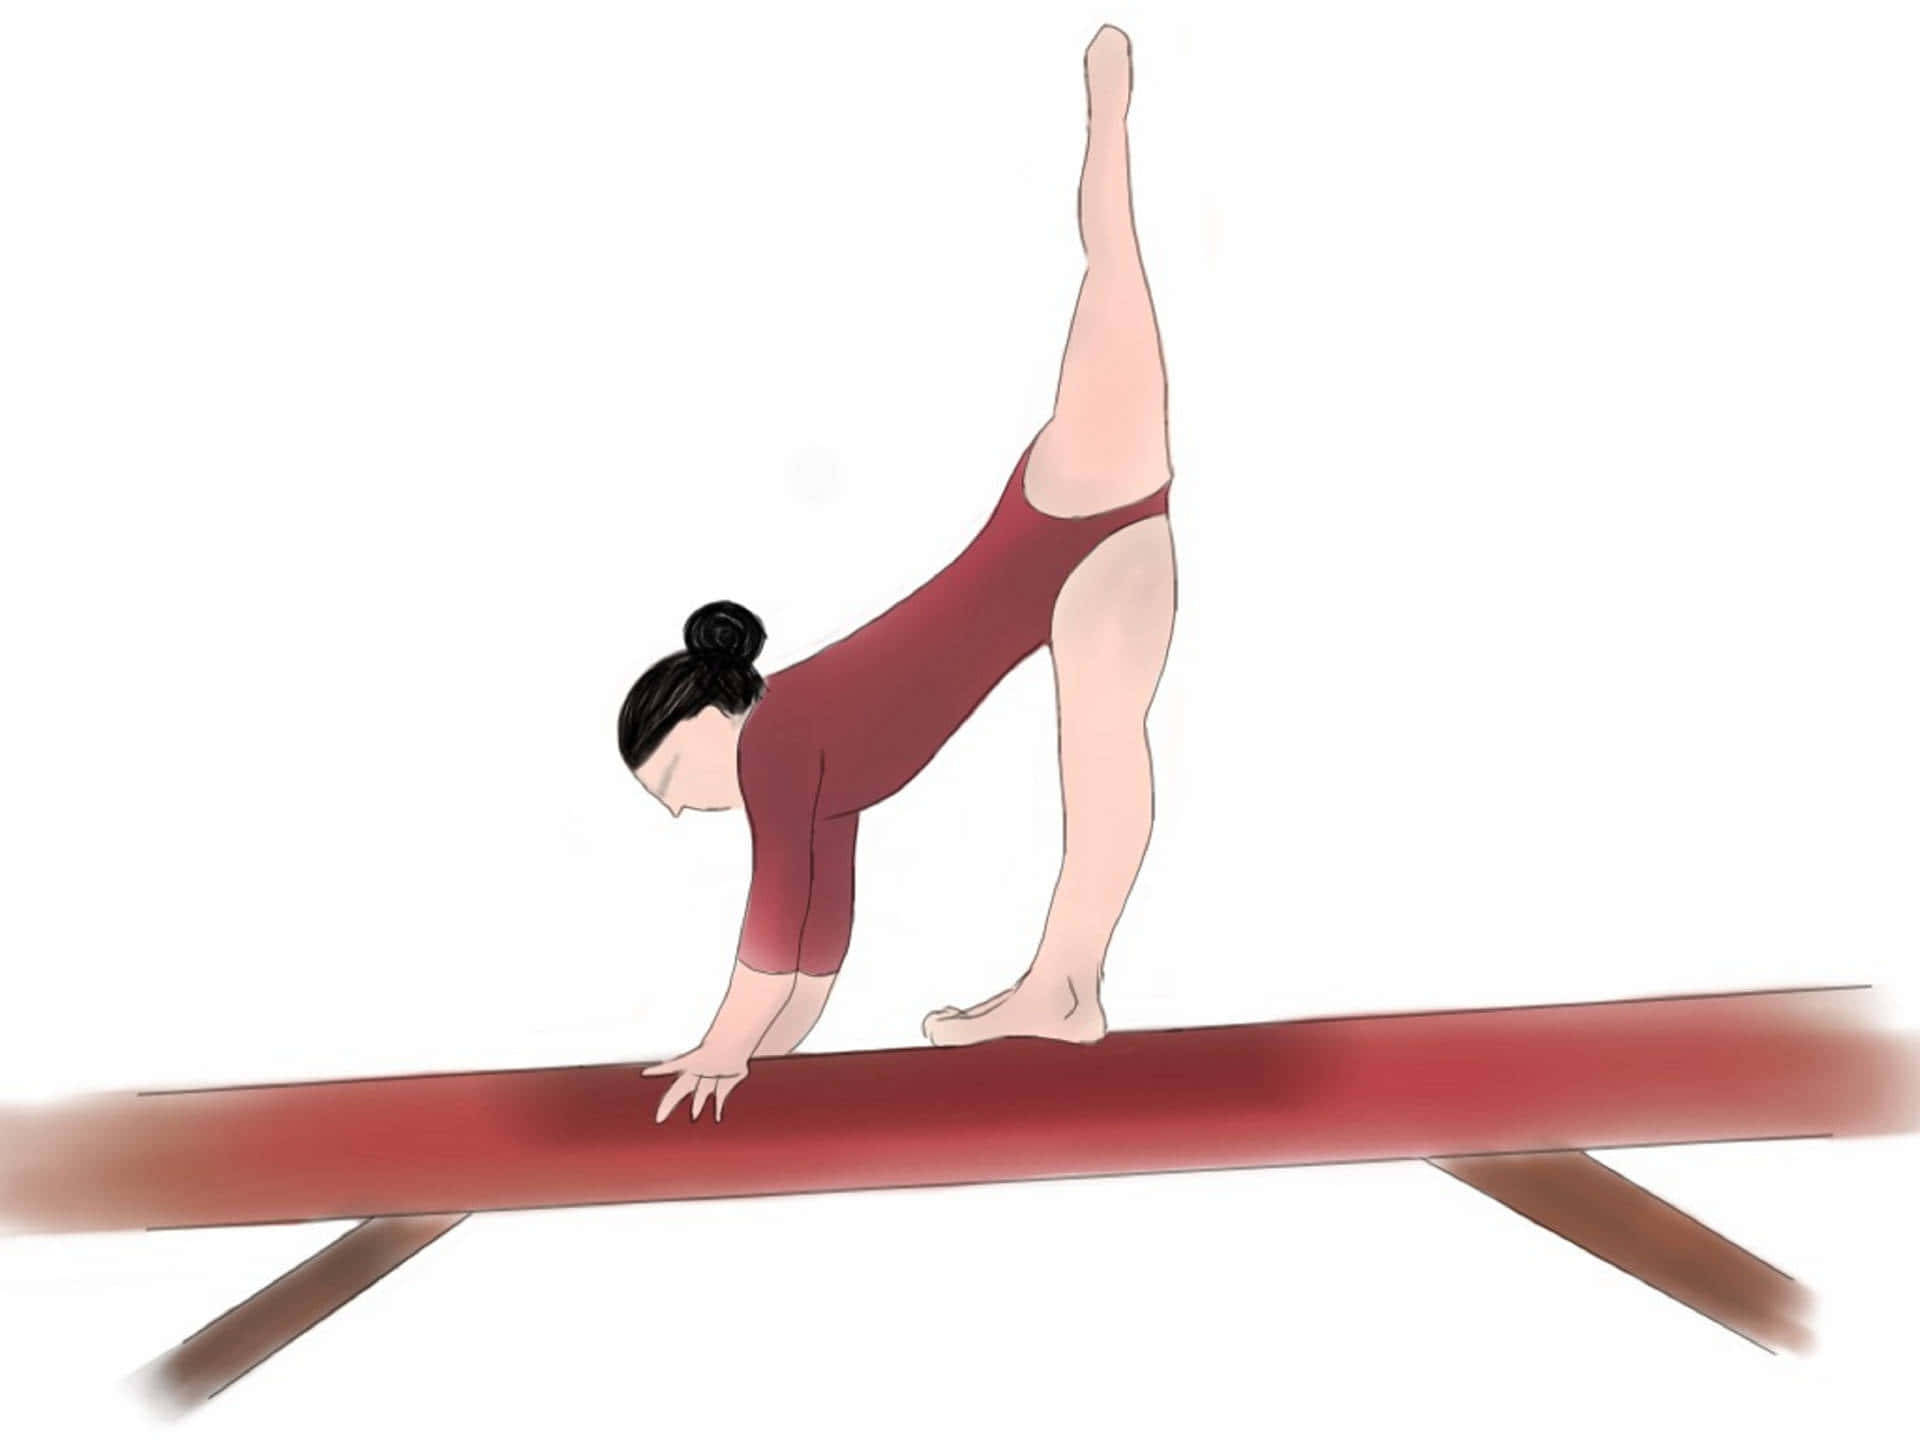 A young female gymnast passionately performs on a balance beam